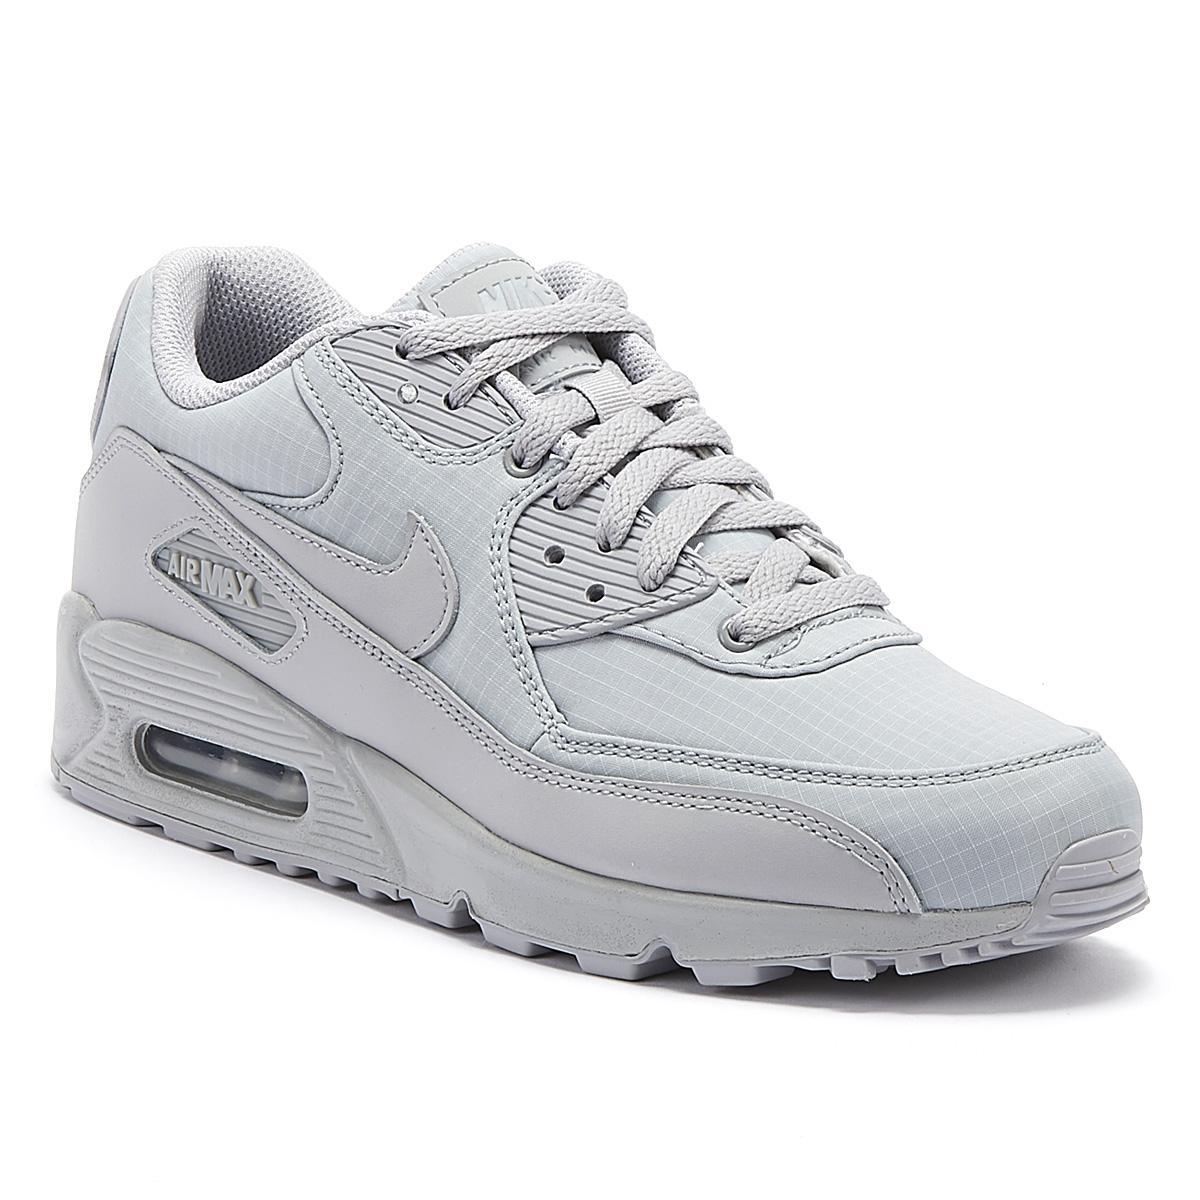 Nike Leather Air Max 90 Essential Mens Wolf Grey Trainers in Gray for Men -  Lyst